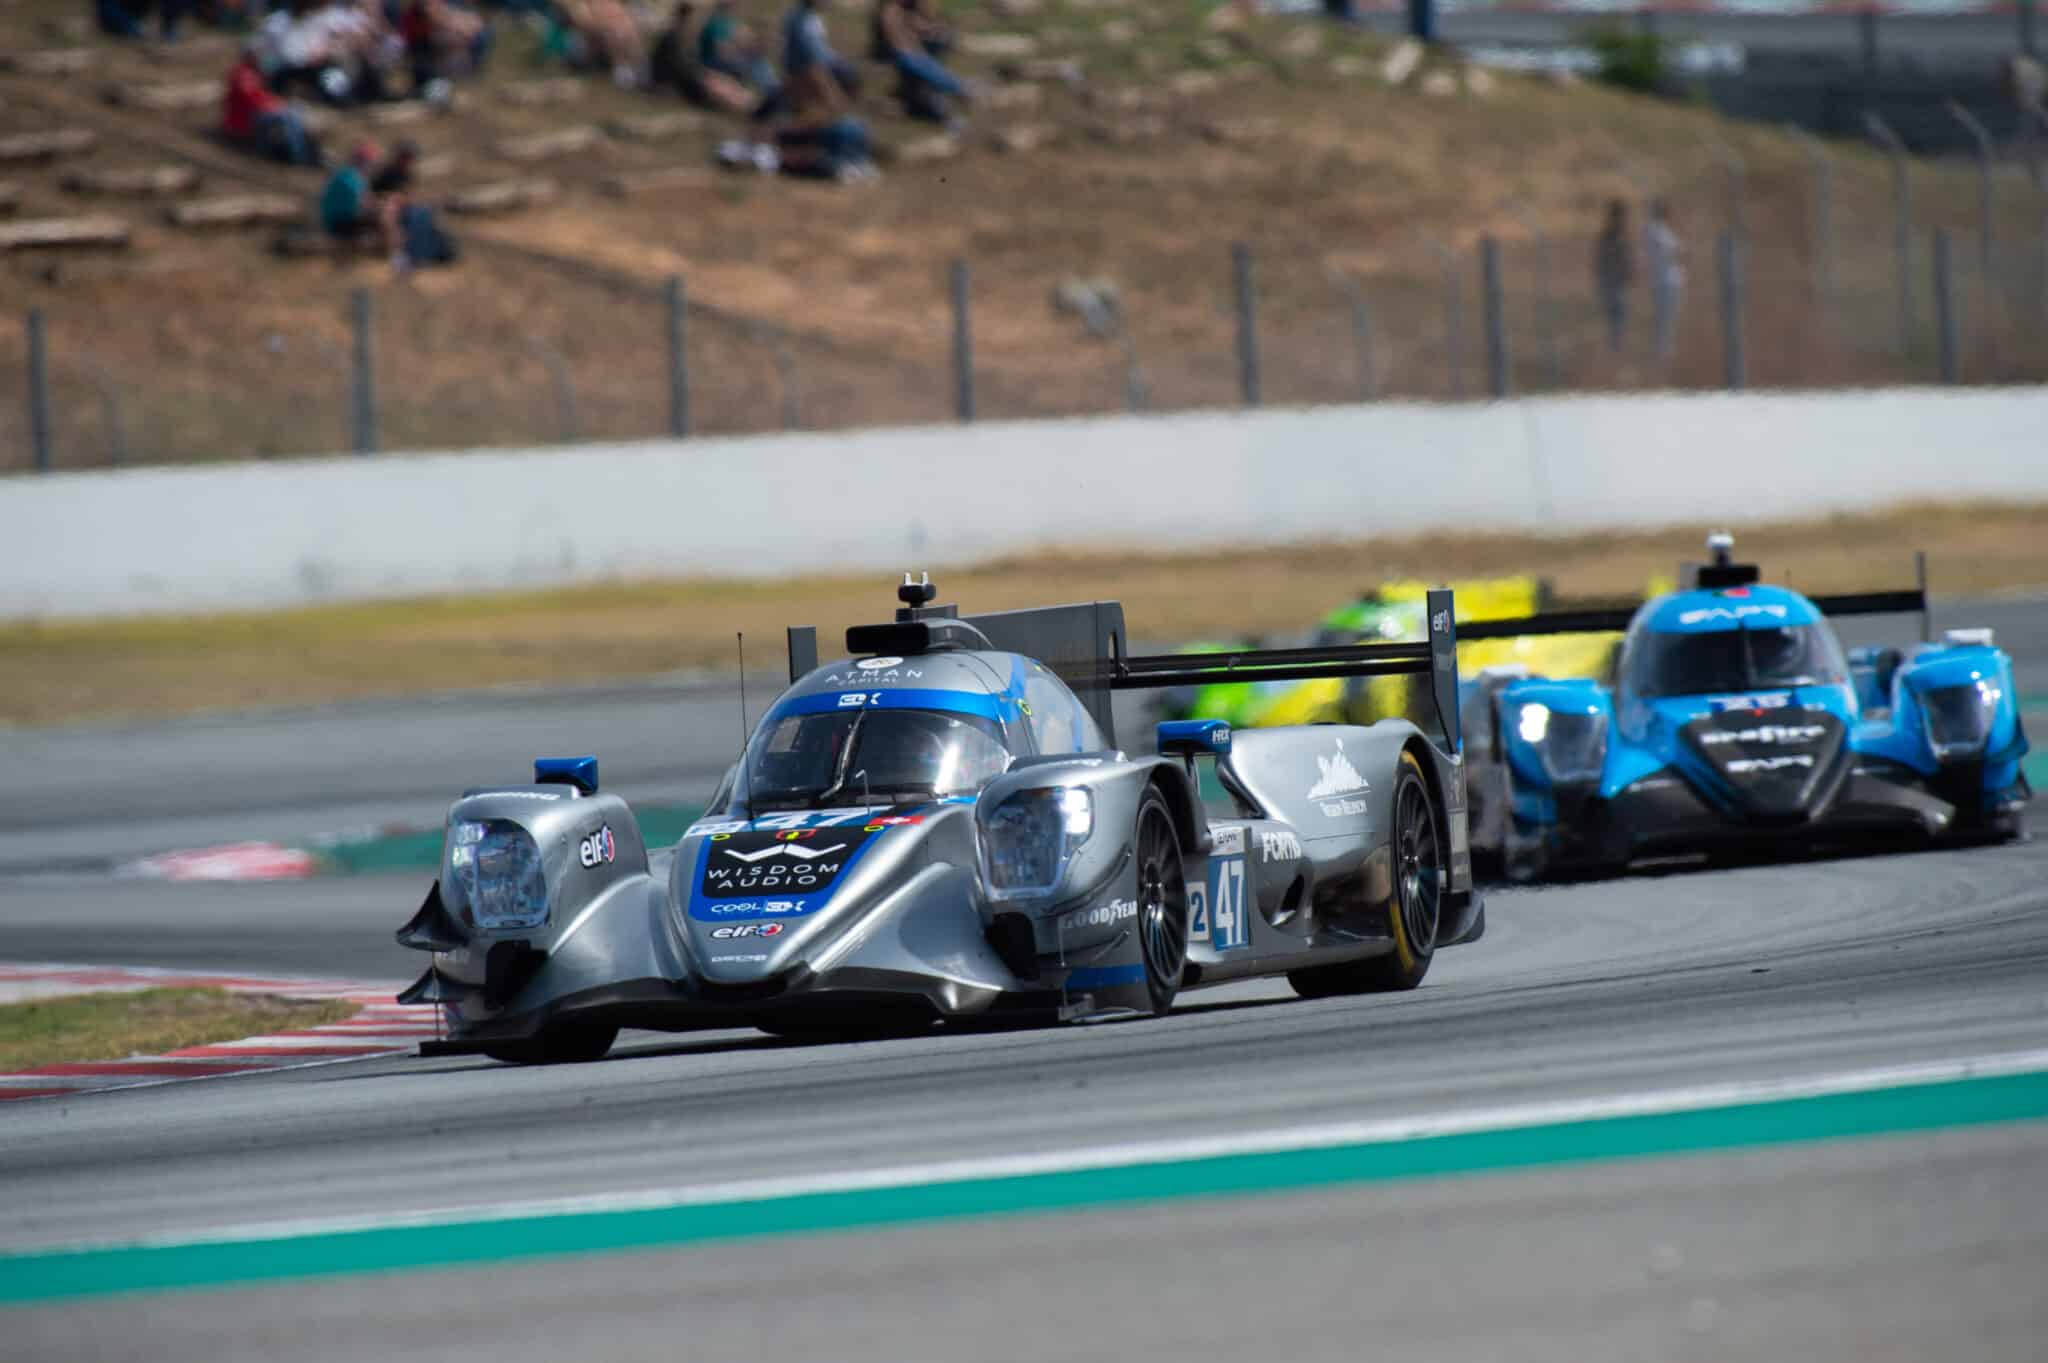 - FP1 4 Hours of Barcelona : Cool Racing ahead after first of the season